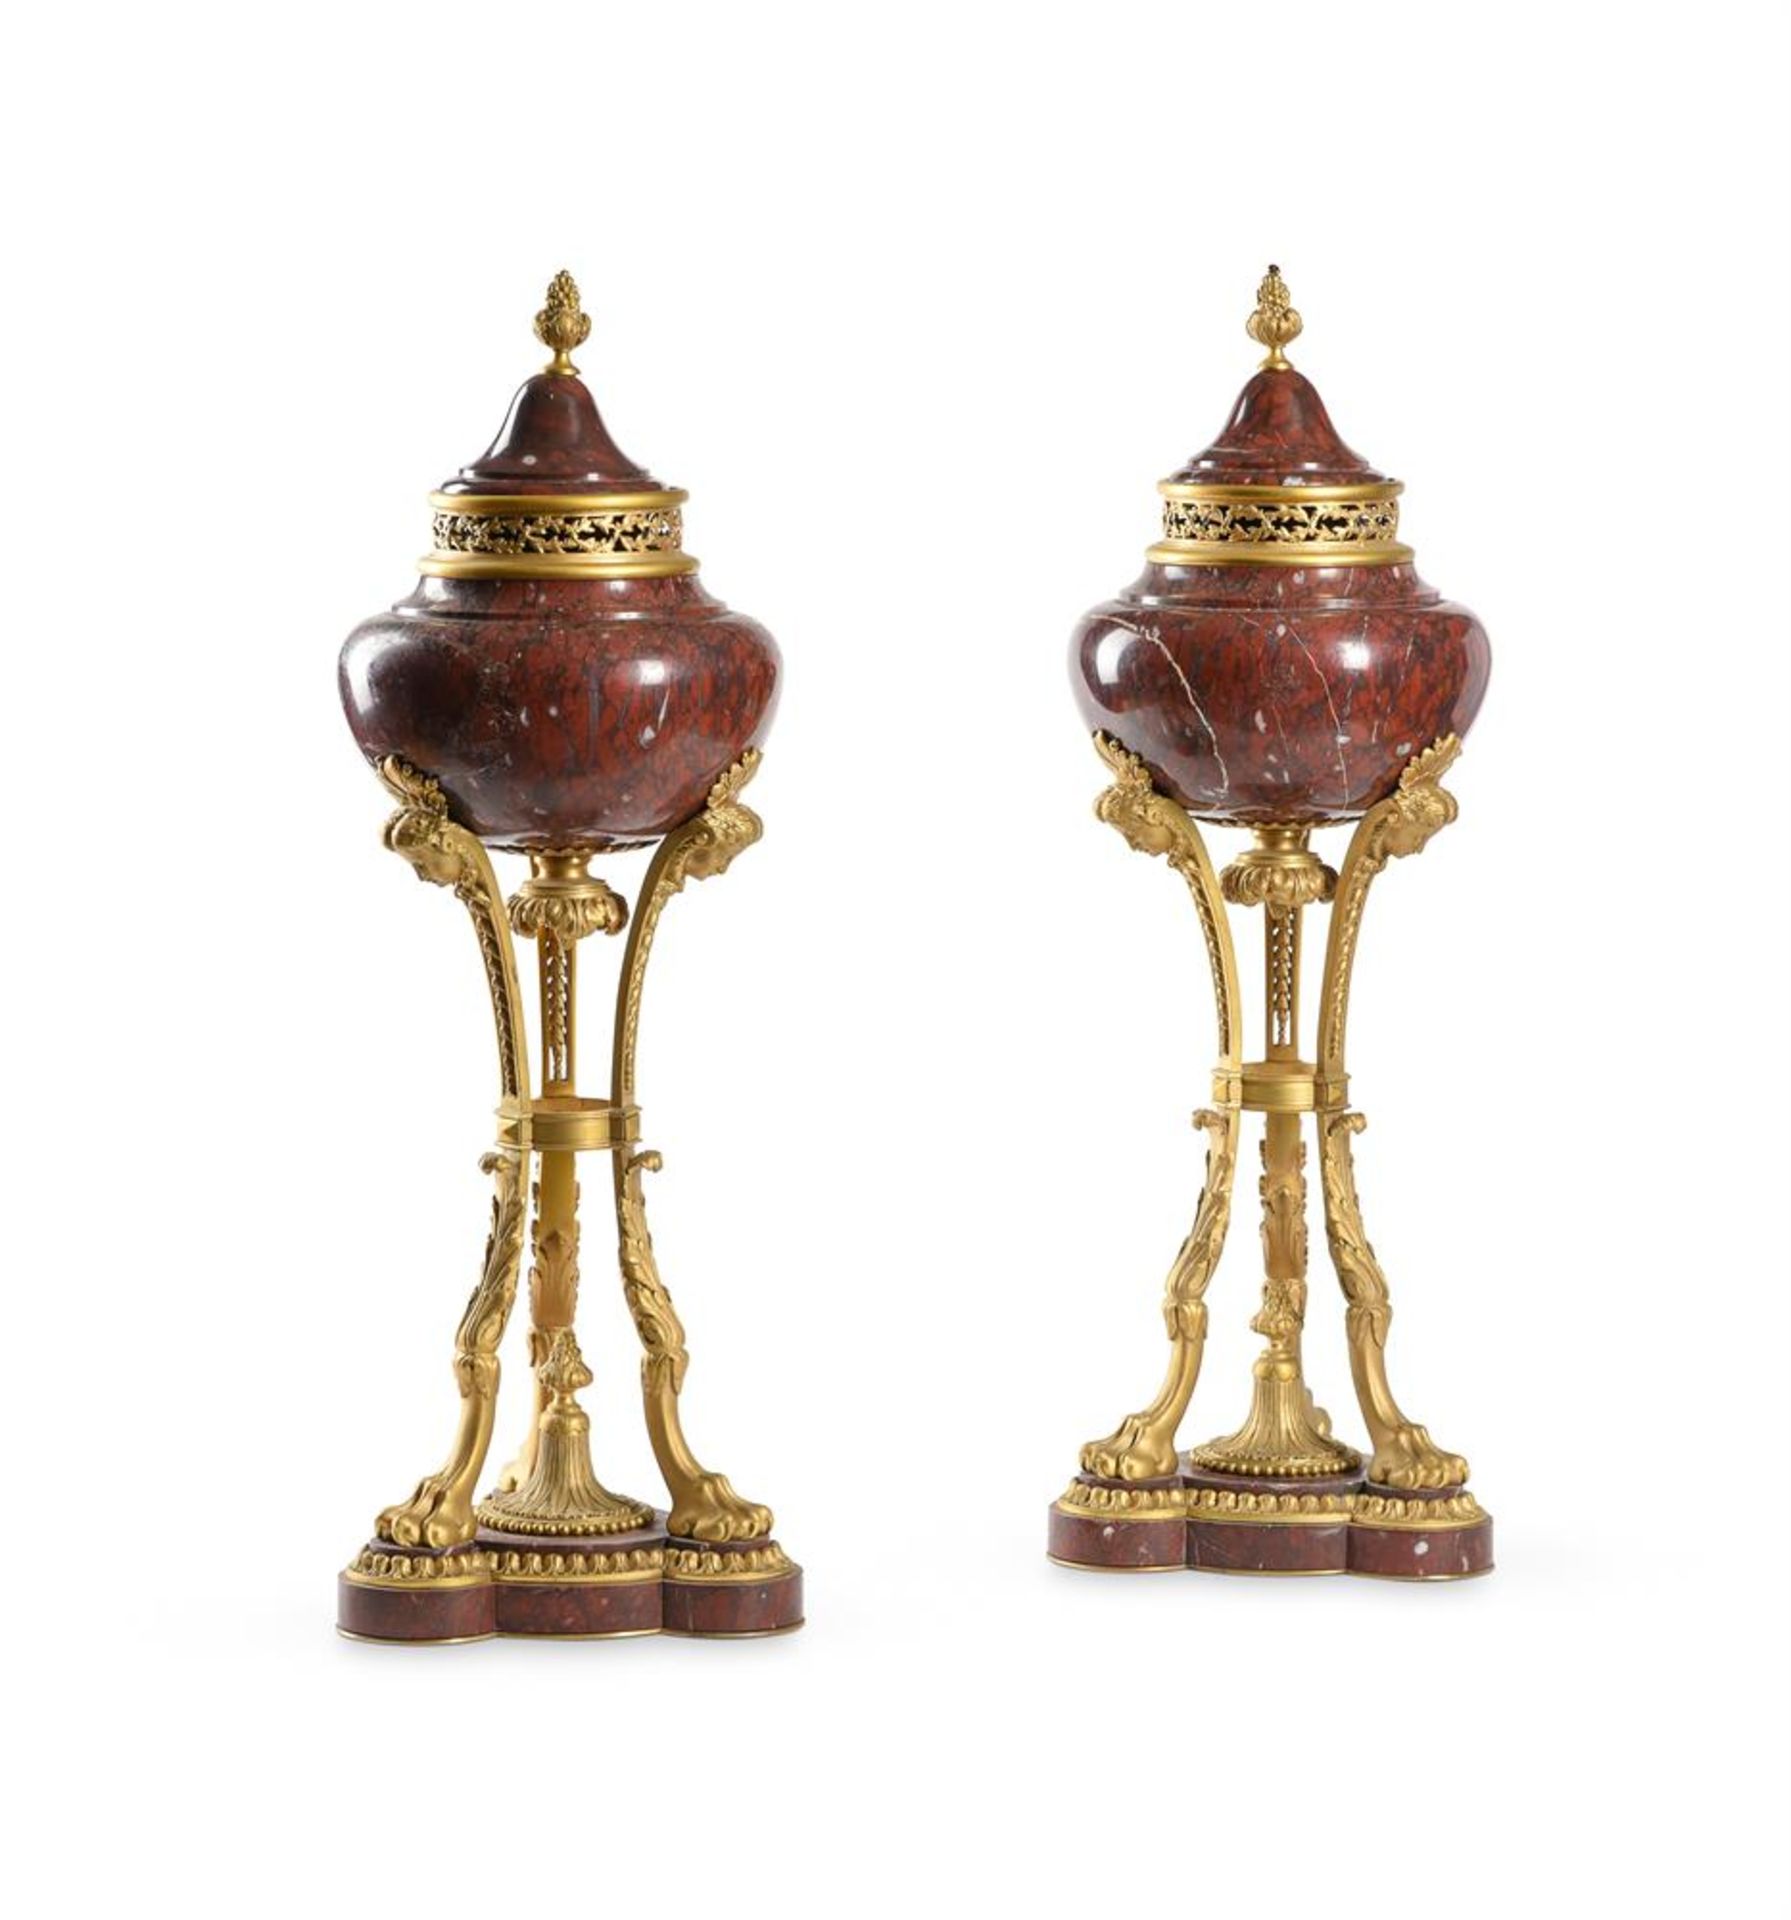 A LARGE PAIR OF FRENCH ORMOLU MOUNTED ROUGE GRIOTTE MARBLE BRULE PARFUMS, 19TH OR 20TH CENTURY - Image 2 of 4